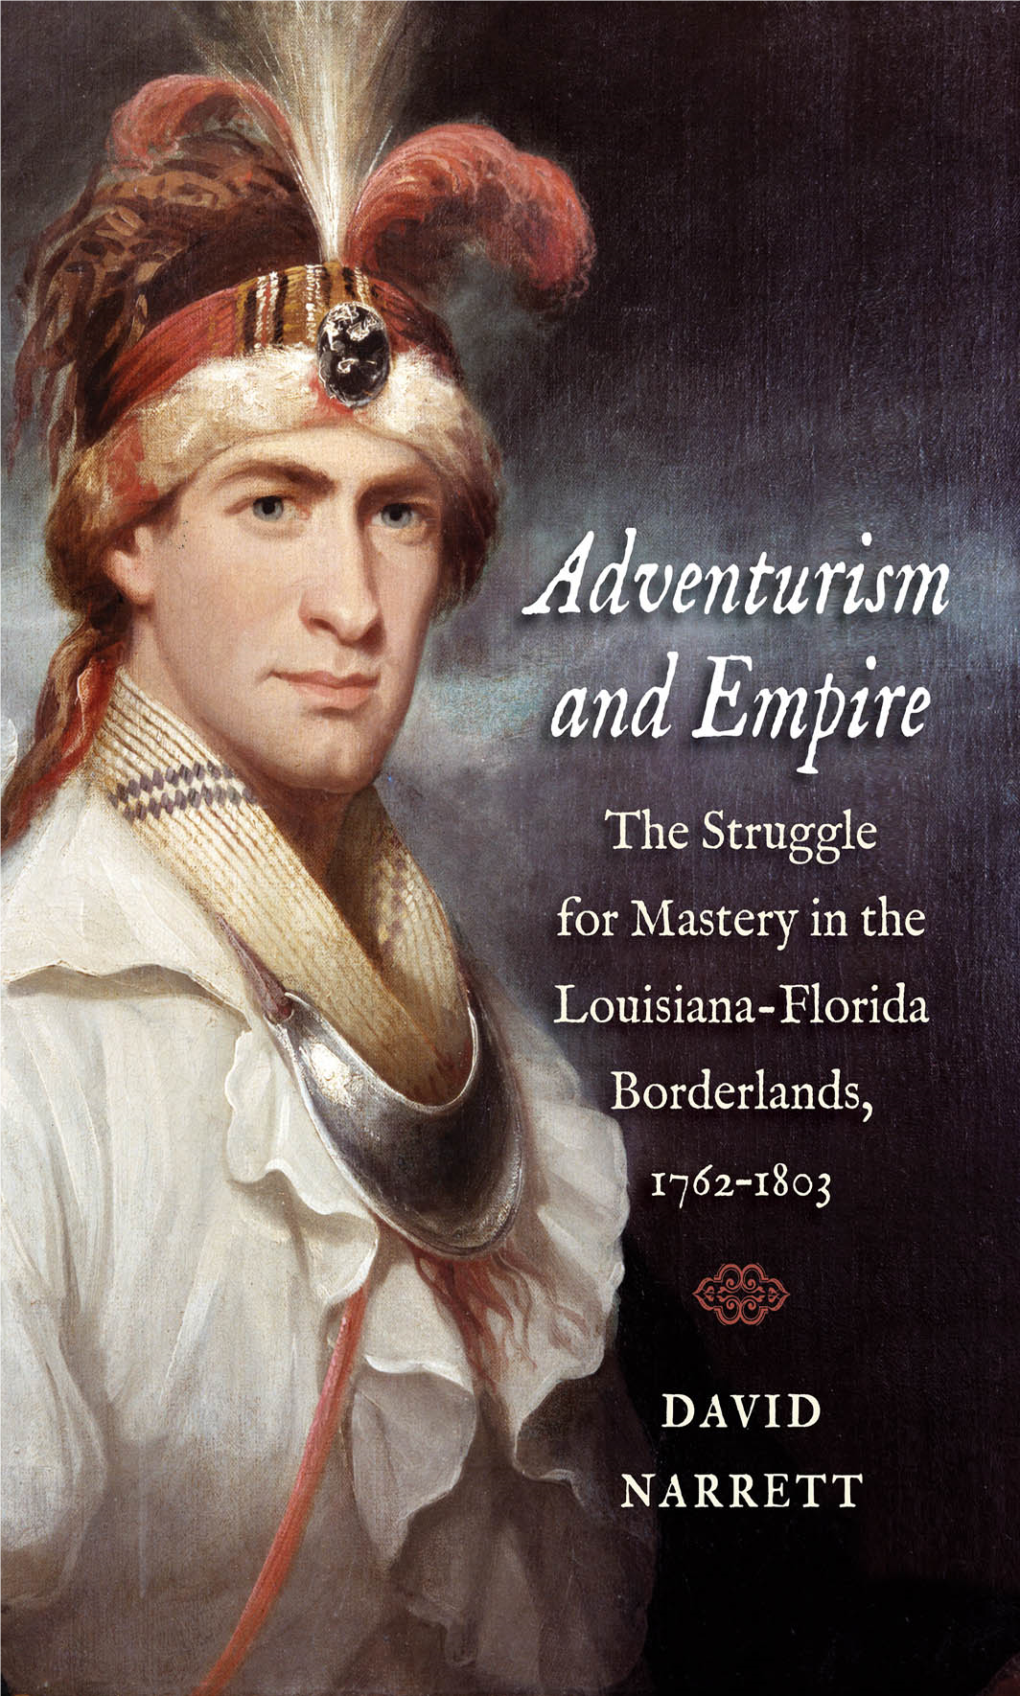 Adventurism and Empire: the Struggle for Mastery in the Louisiana